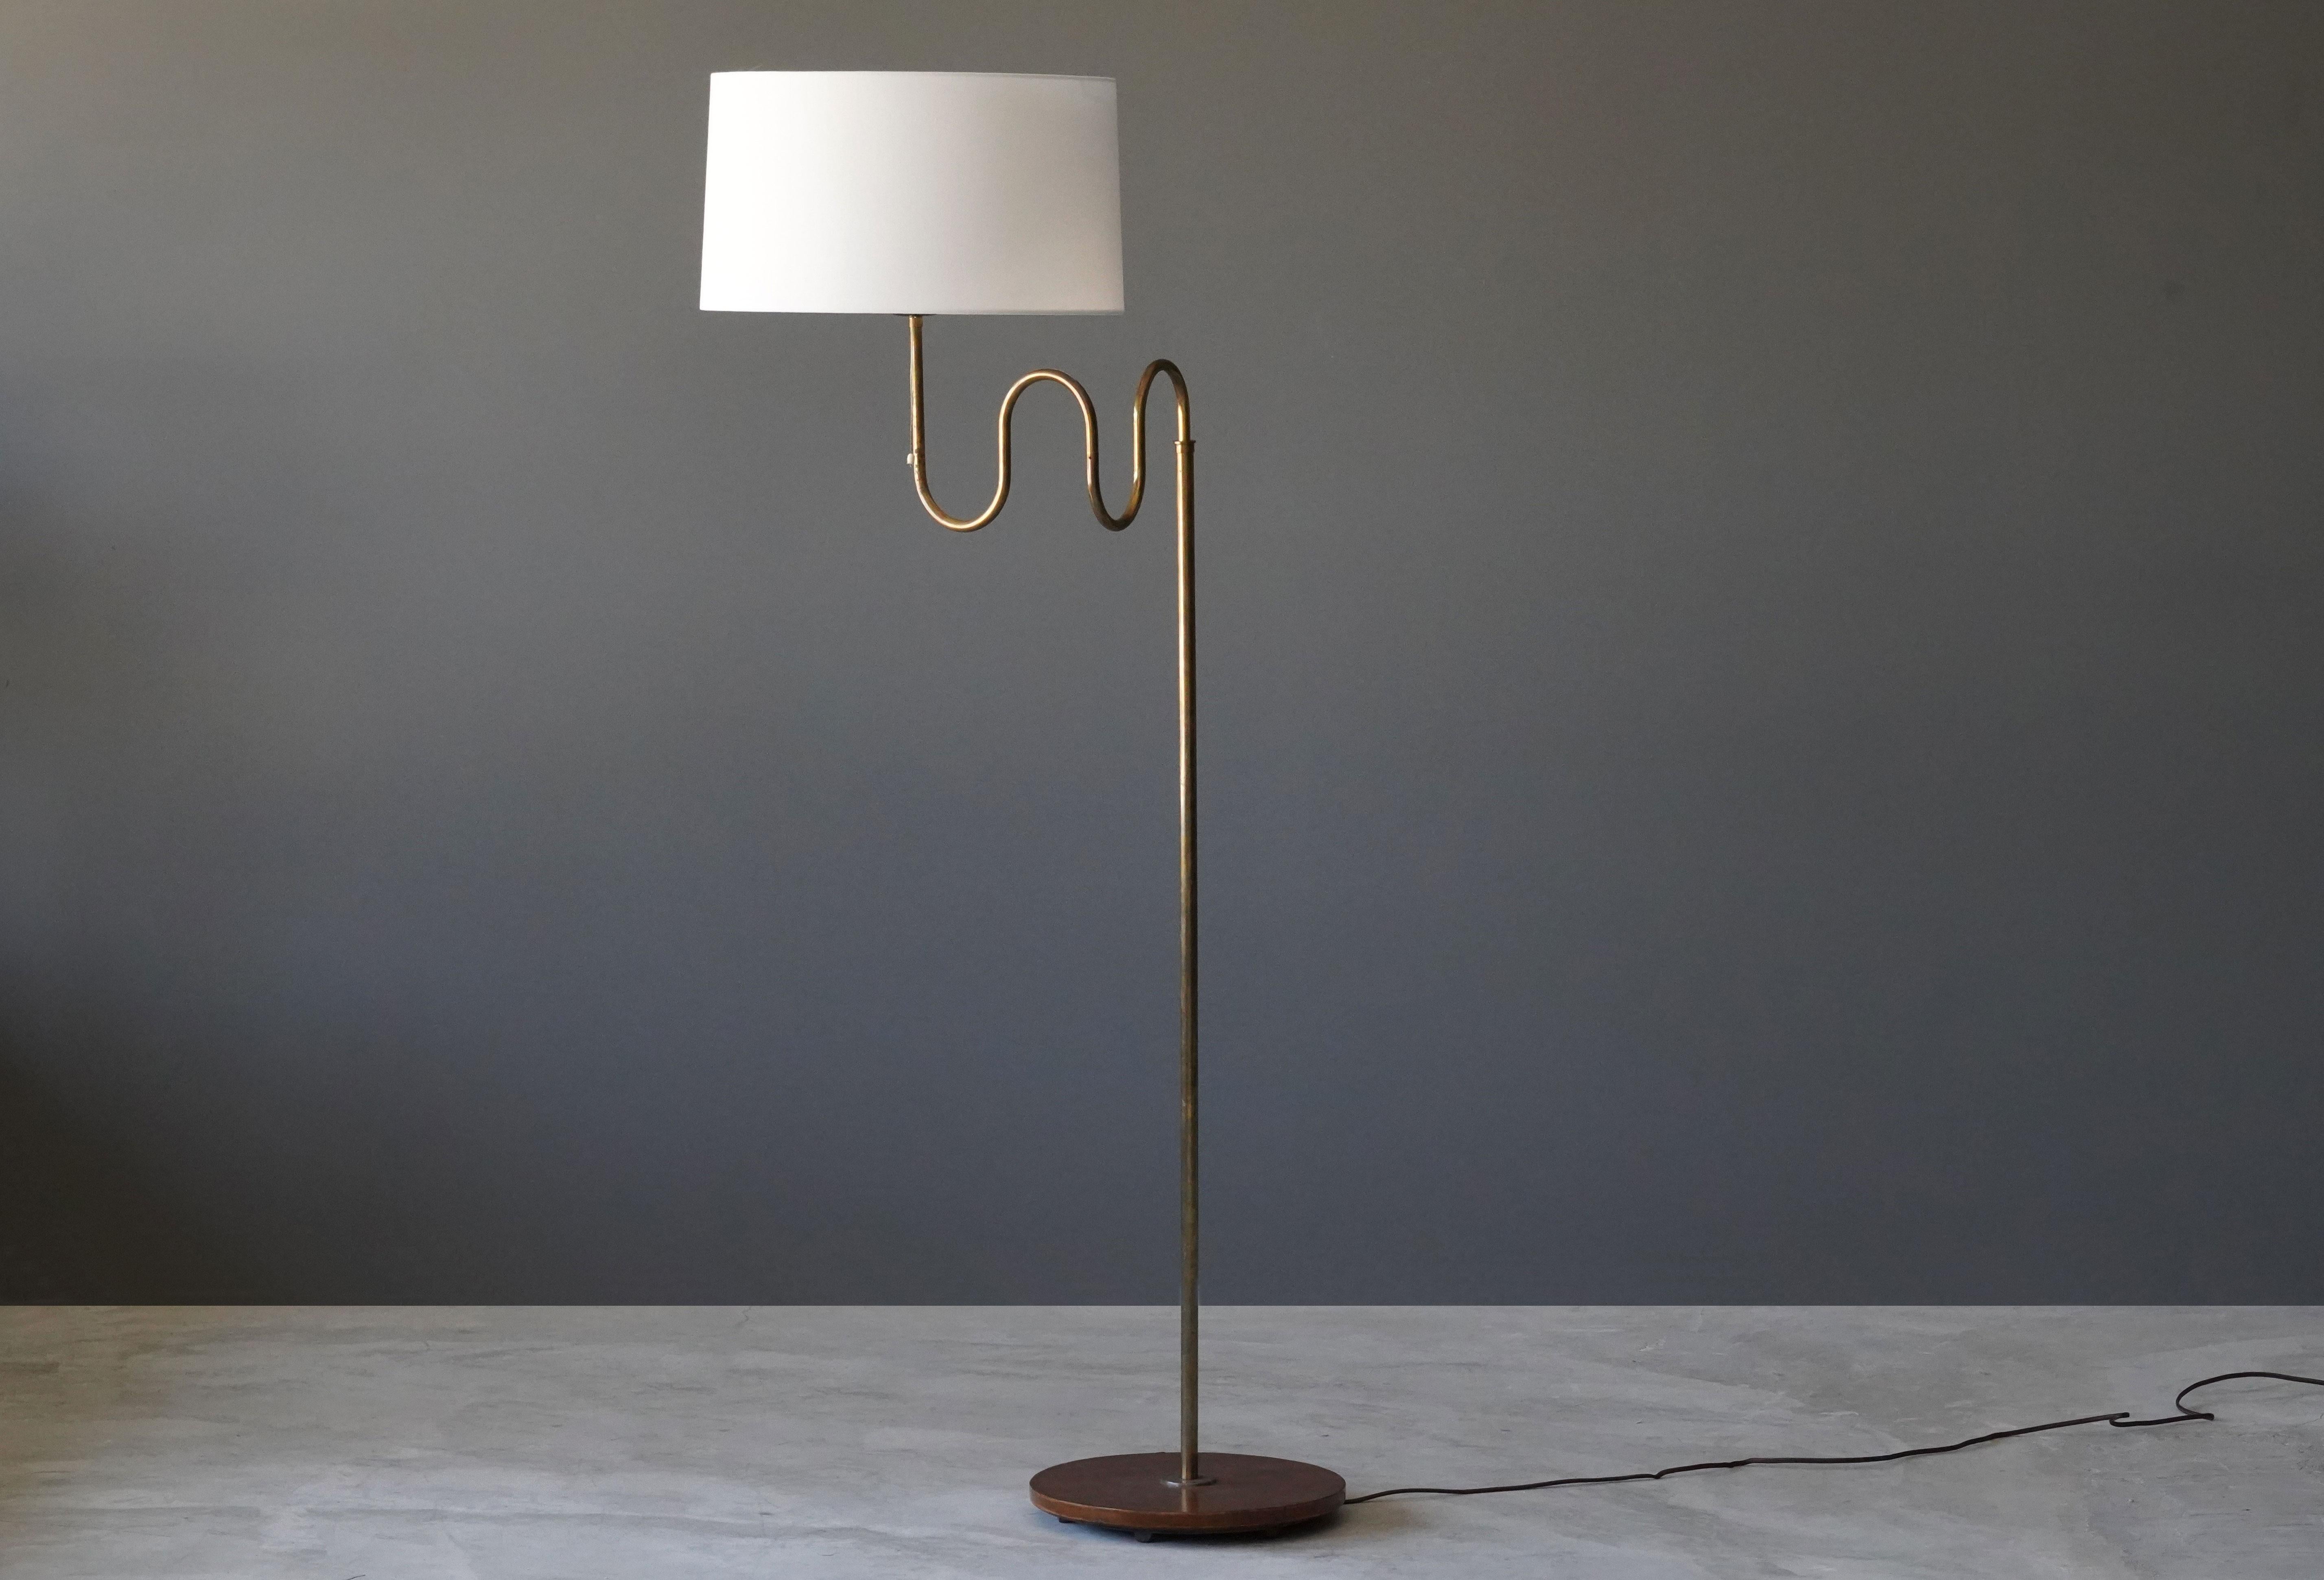 An adjustable functionalist floor lamp, produced by Böhlmarks, Sweden, 1940s. A highly functional piece providing adjustable height as well as an adjustable position of the arm.

Other famous lighting designers of the 20th century include serge